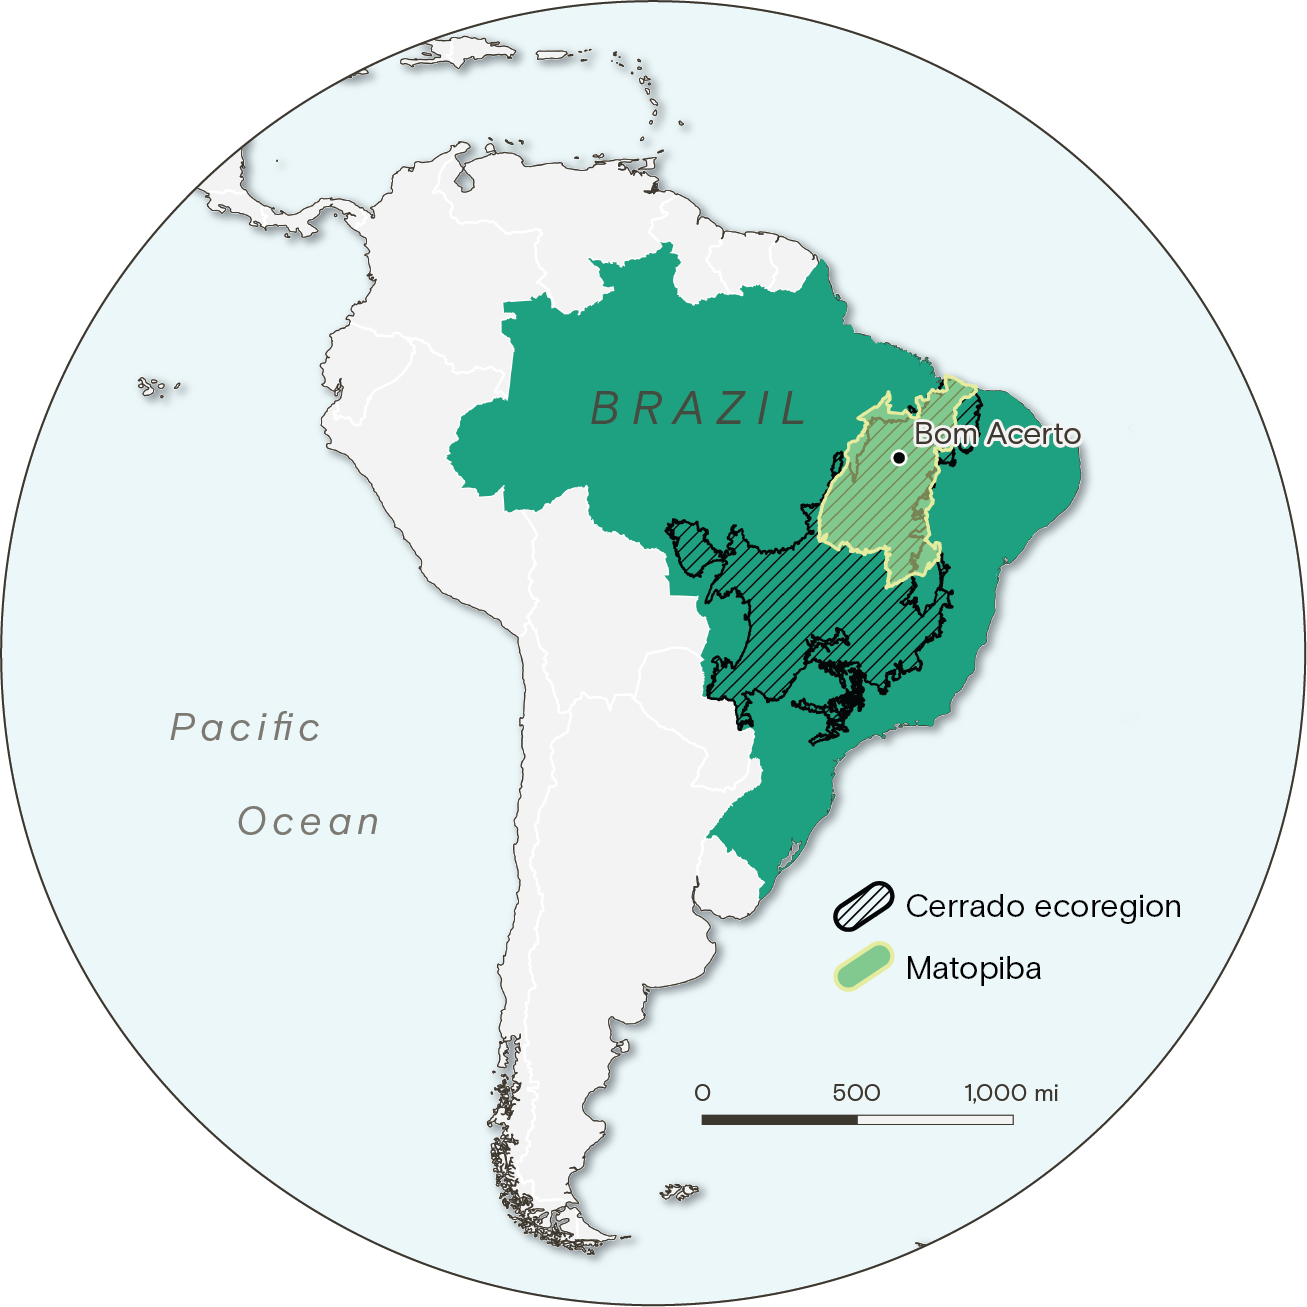 A map showing the Cerrado ecoregion and the Matopiba geopolitical region in northeastern Brazil. The settlement of Bom Acerto is highlighted; it is in the middle of the overlap between the two regions.